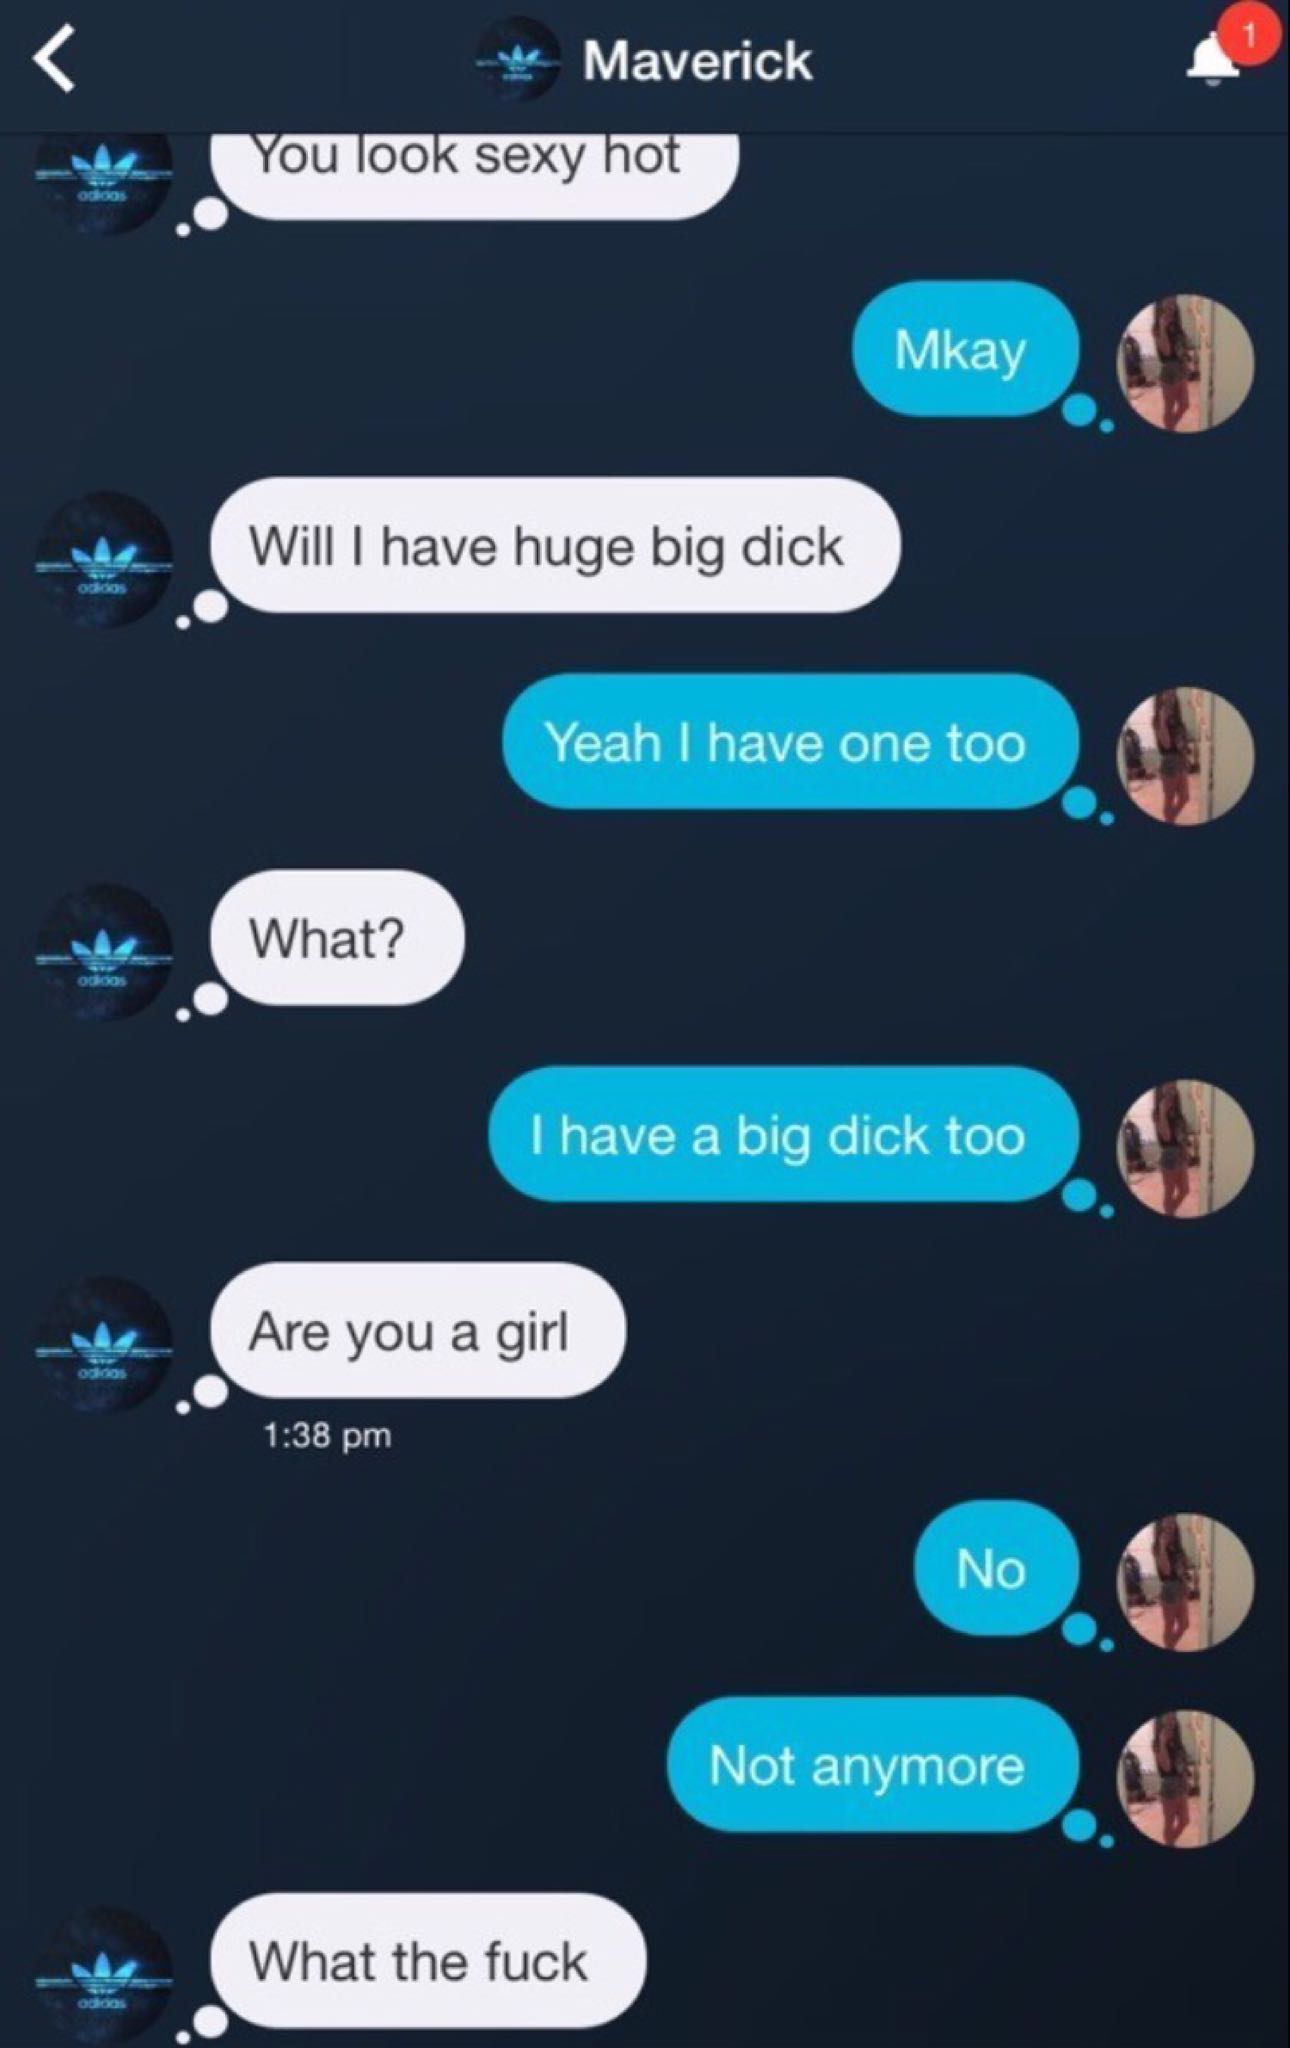 screenshot - Maverick You look sexy hot ho Mkay Will I have huge big dick Yeah I have one too What? oodieos I have a big dick too Are you a girl No Not anymore What the fuck